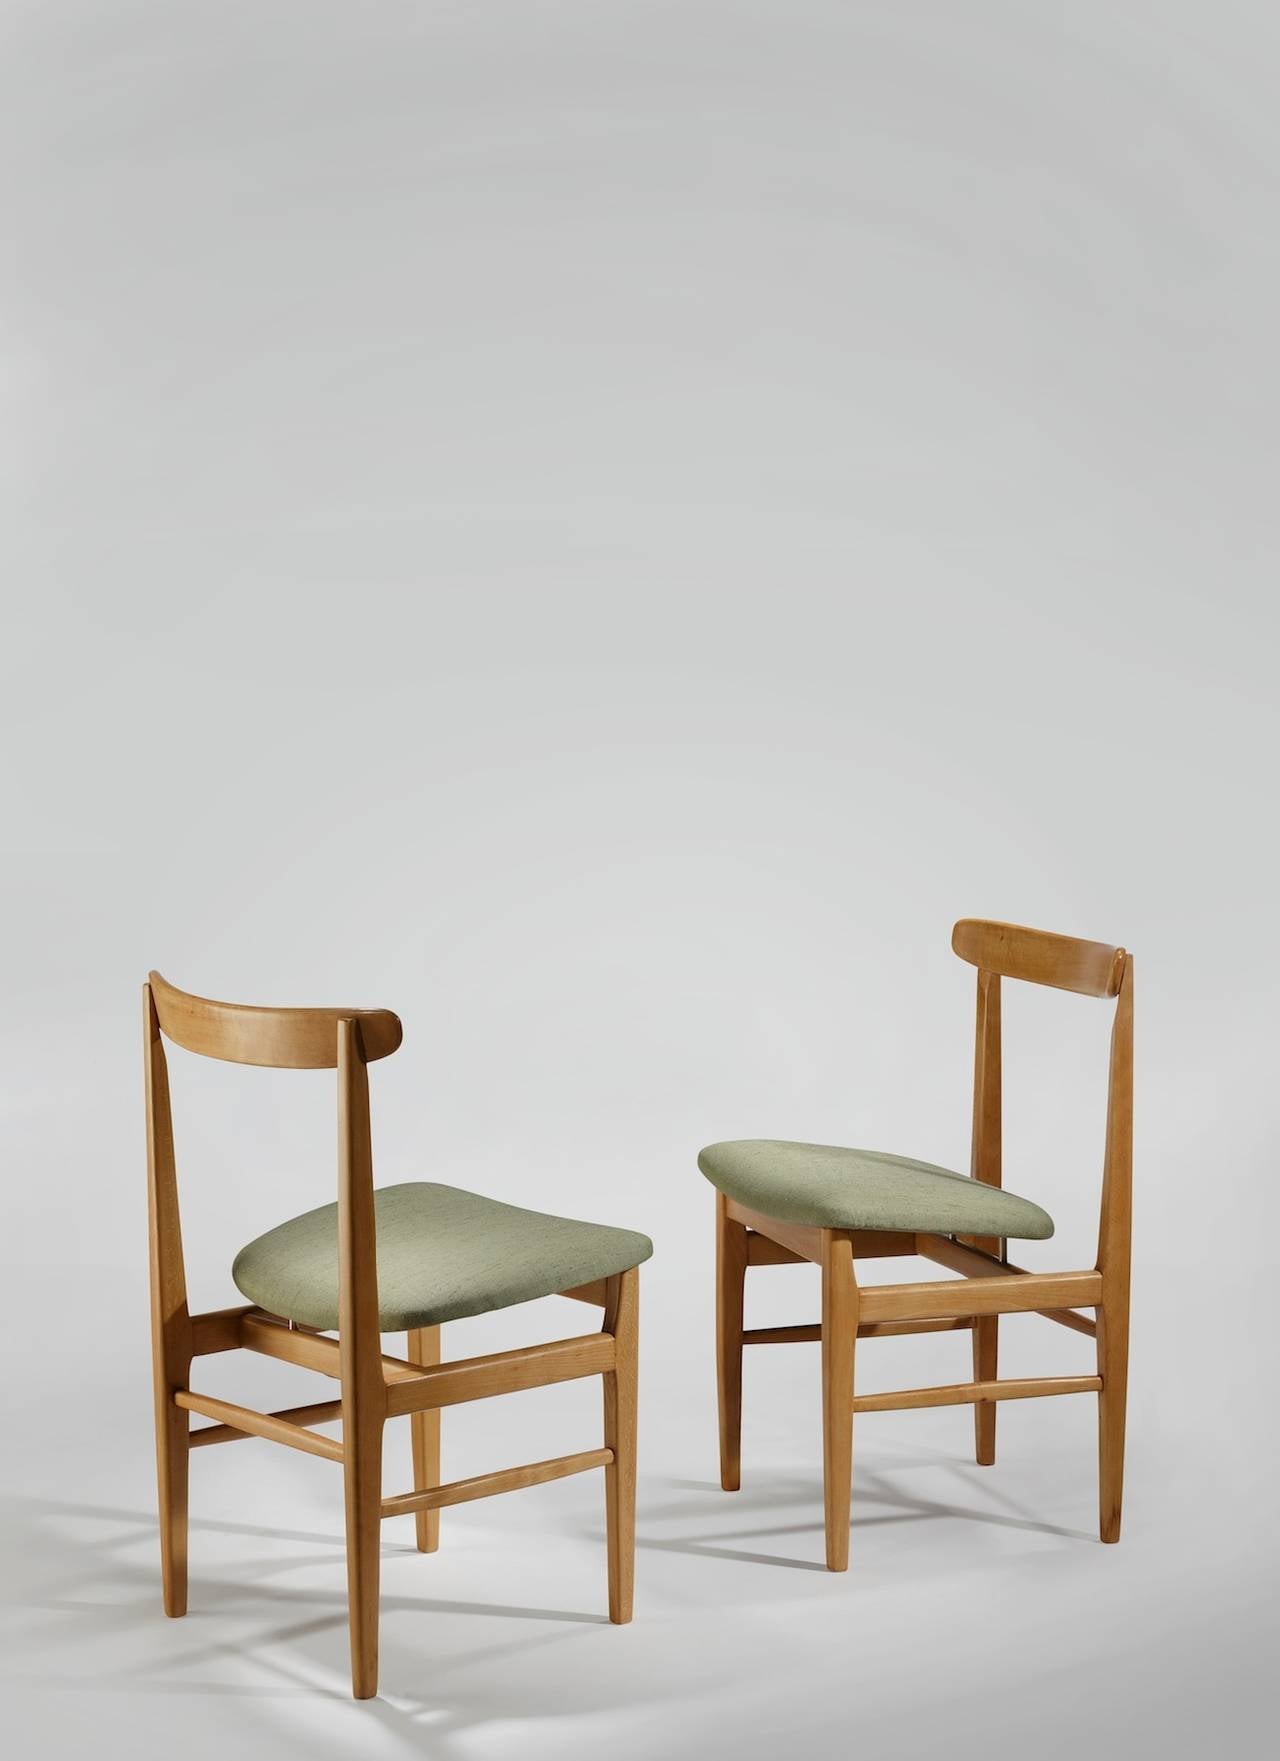 Set of four dining chairs by Rene´ Jean Caillette in frene (ash), foam and upholstery. Designed in 1955 and produced by Steiner.

About the designer: Rene´-Jean Caillette (1919–2004), was the son of a woodworker. He always intended to follow in